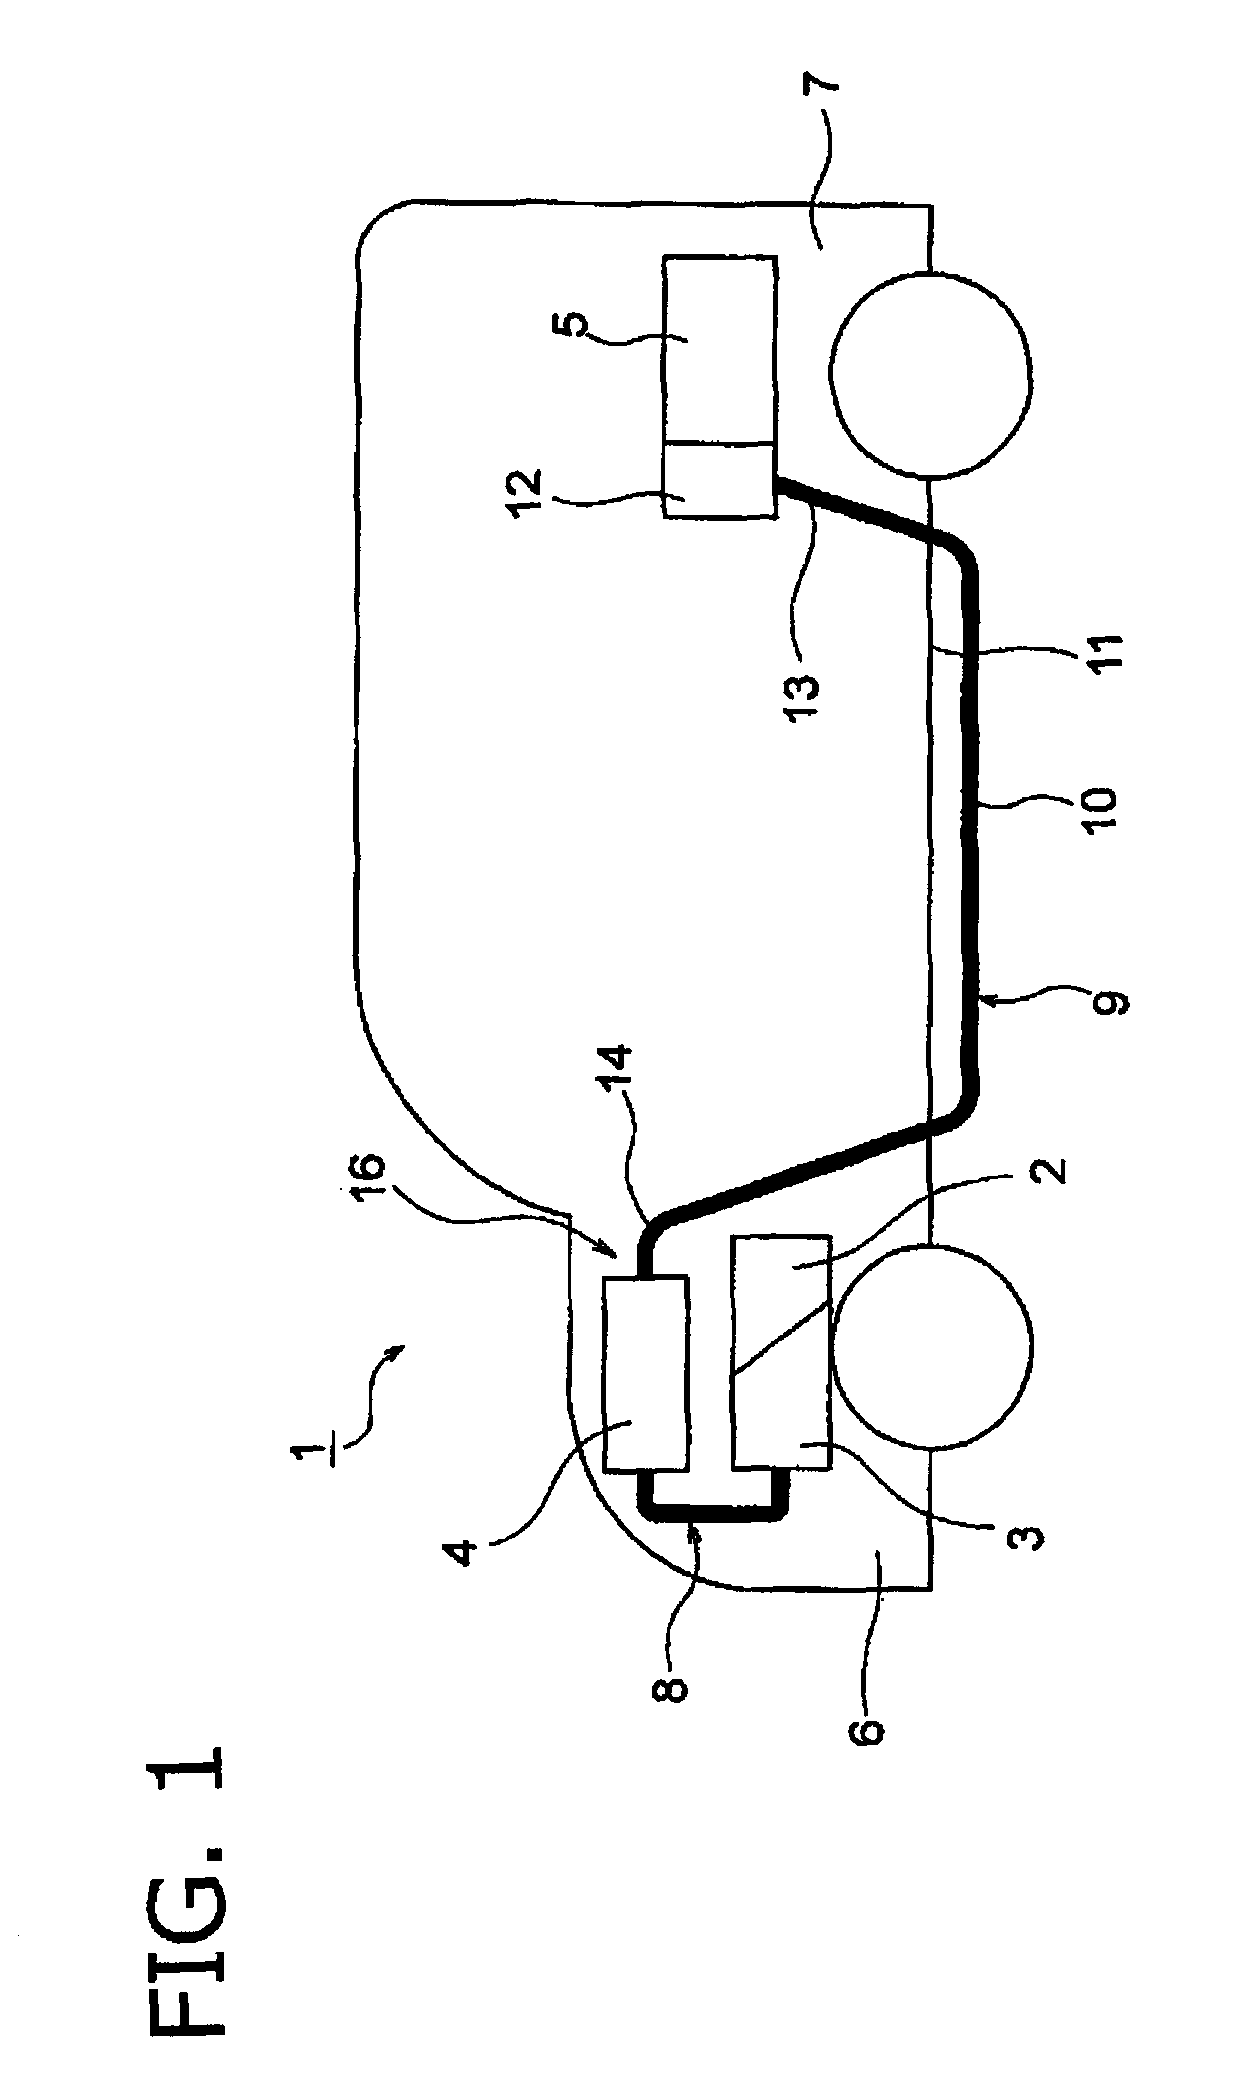 Wire harness with coaxial composite conductive path